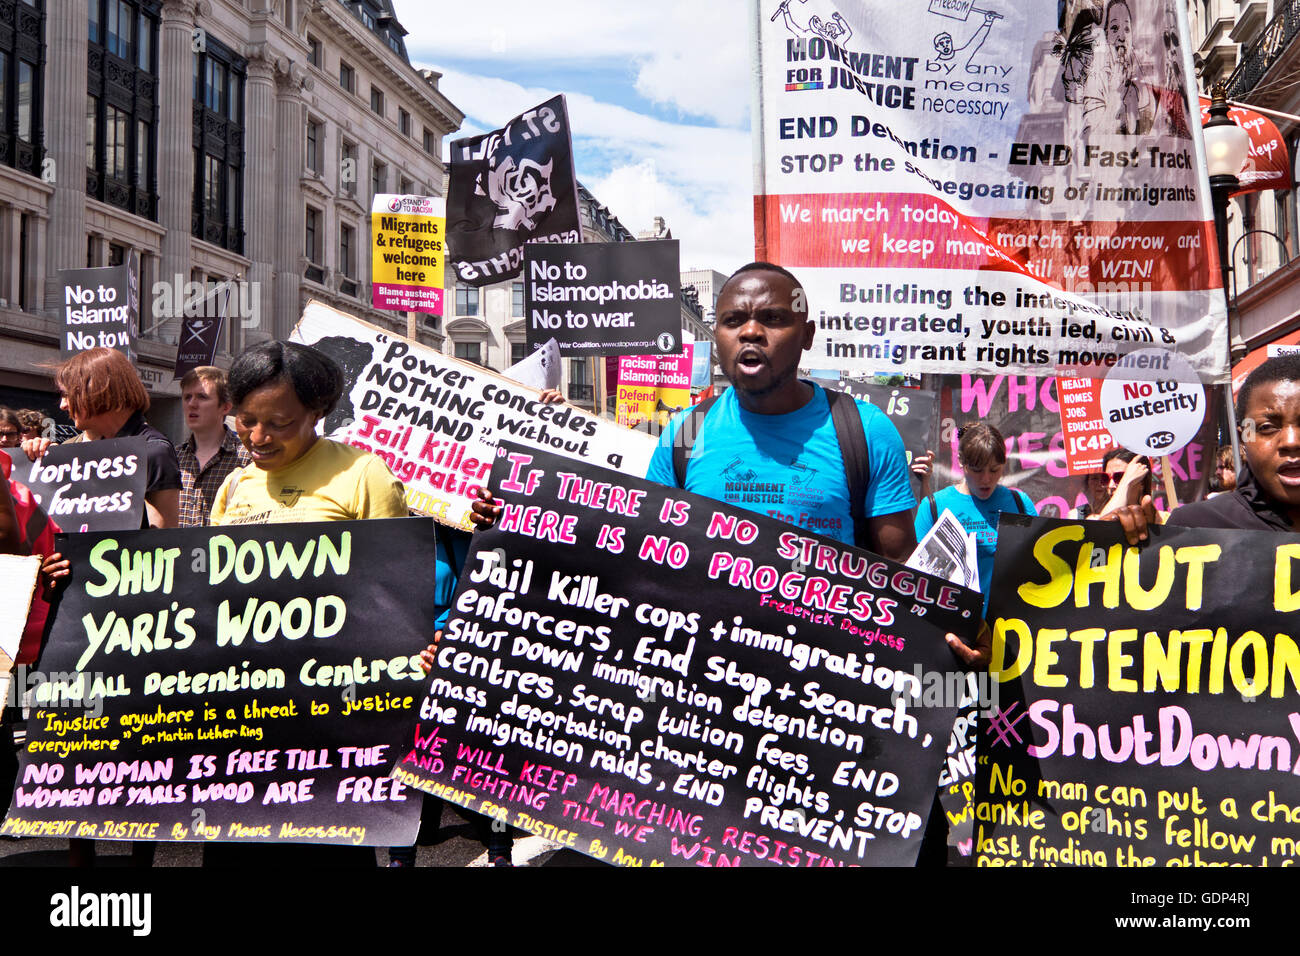 Shut down  Refugee detention Centres. Movement for Justice by any means necessary. Protest in London against racism and Tory au Stock Photo